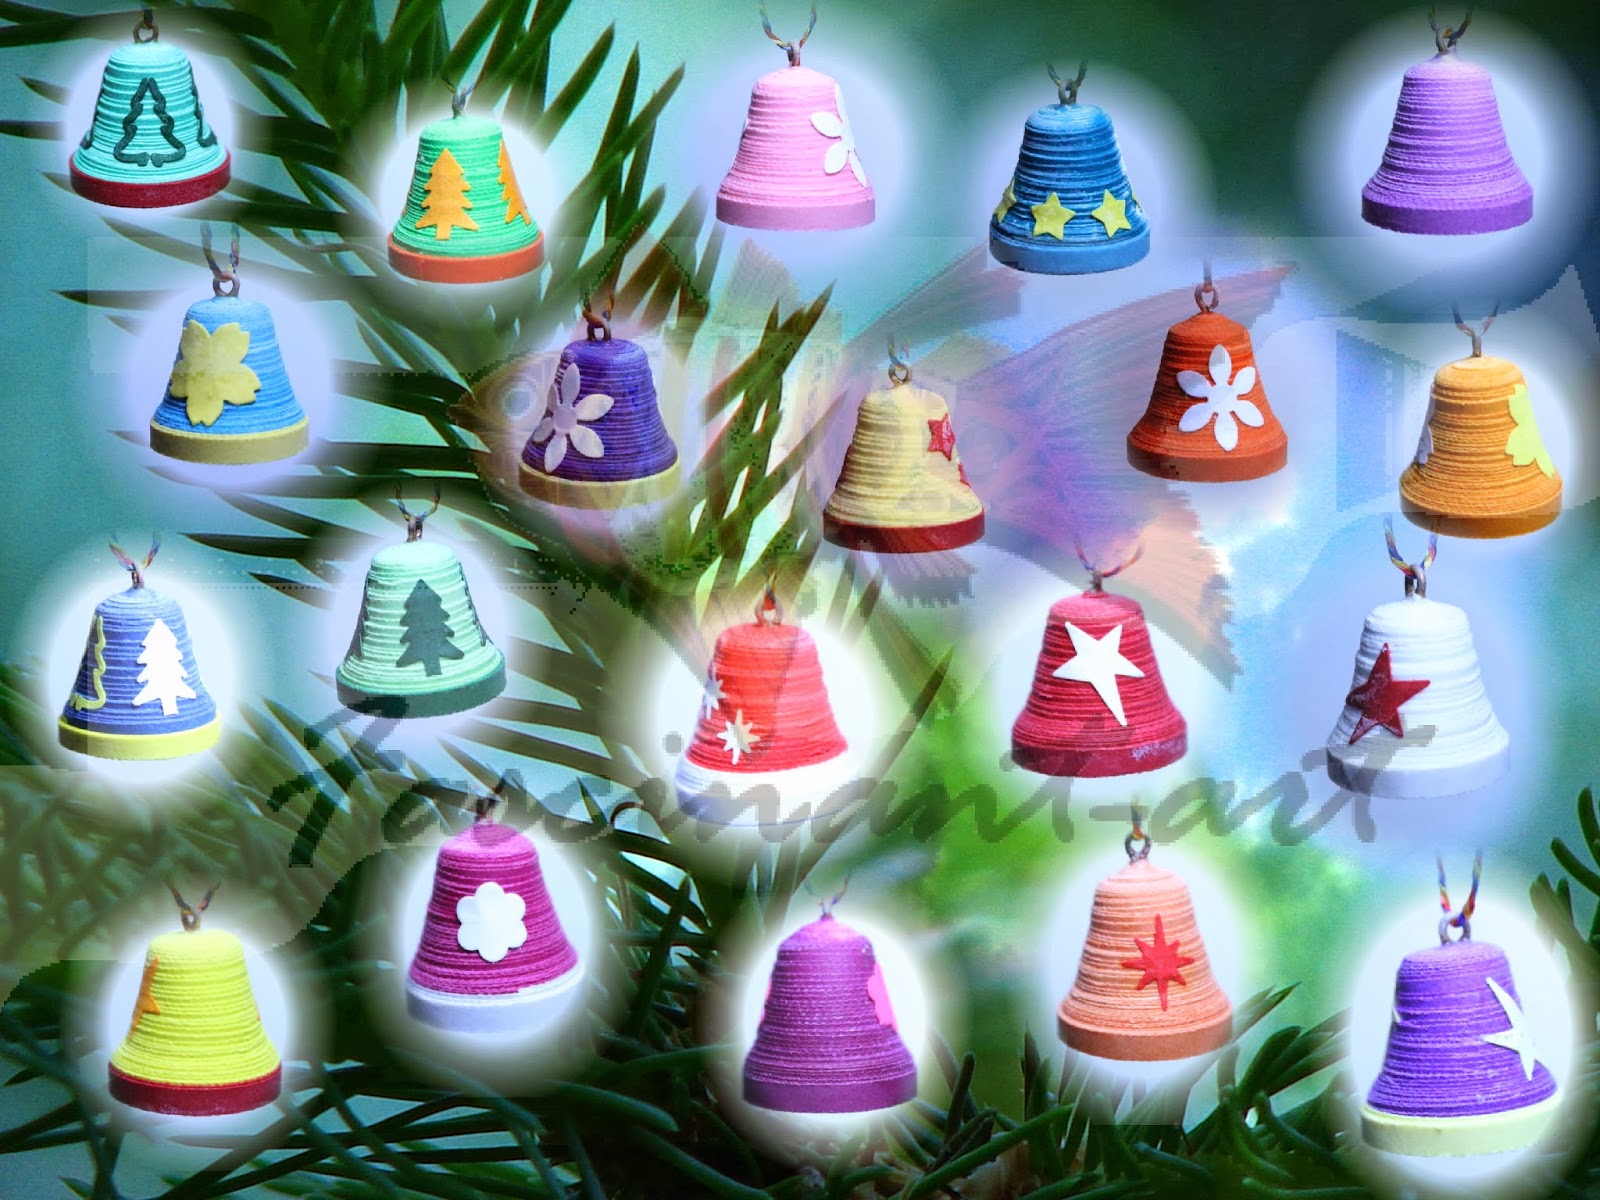 ... : Christmas ornaments & decorations - Christmas tree quilled bells